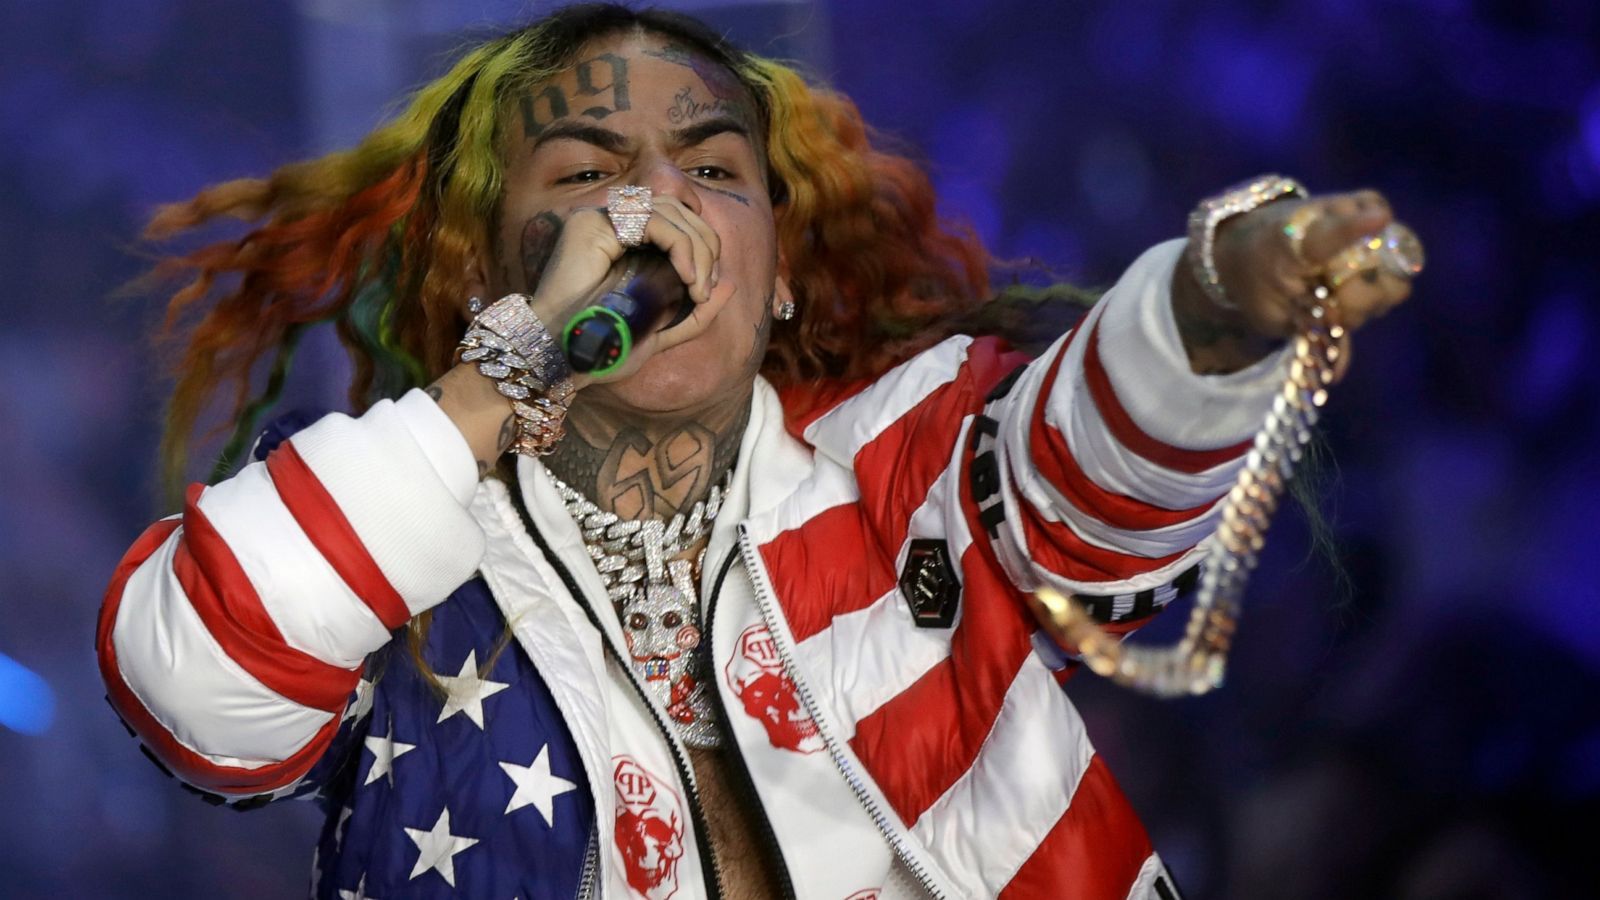 Tekashi 6ix9ine releases new video from home confinement